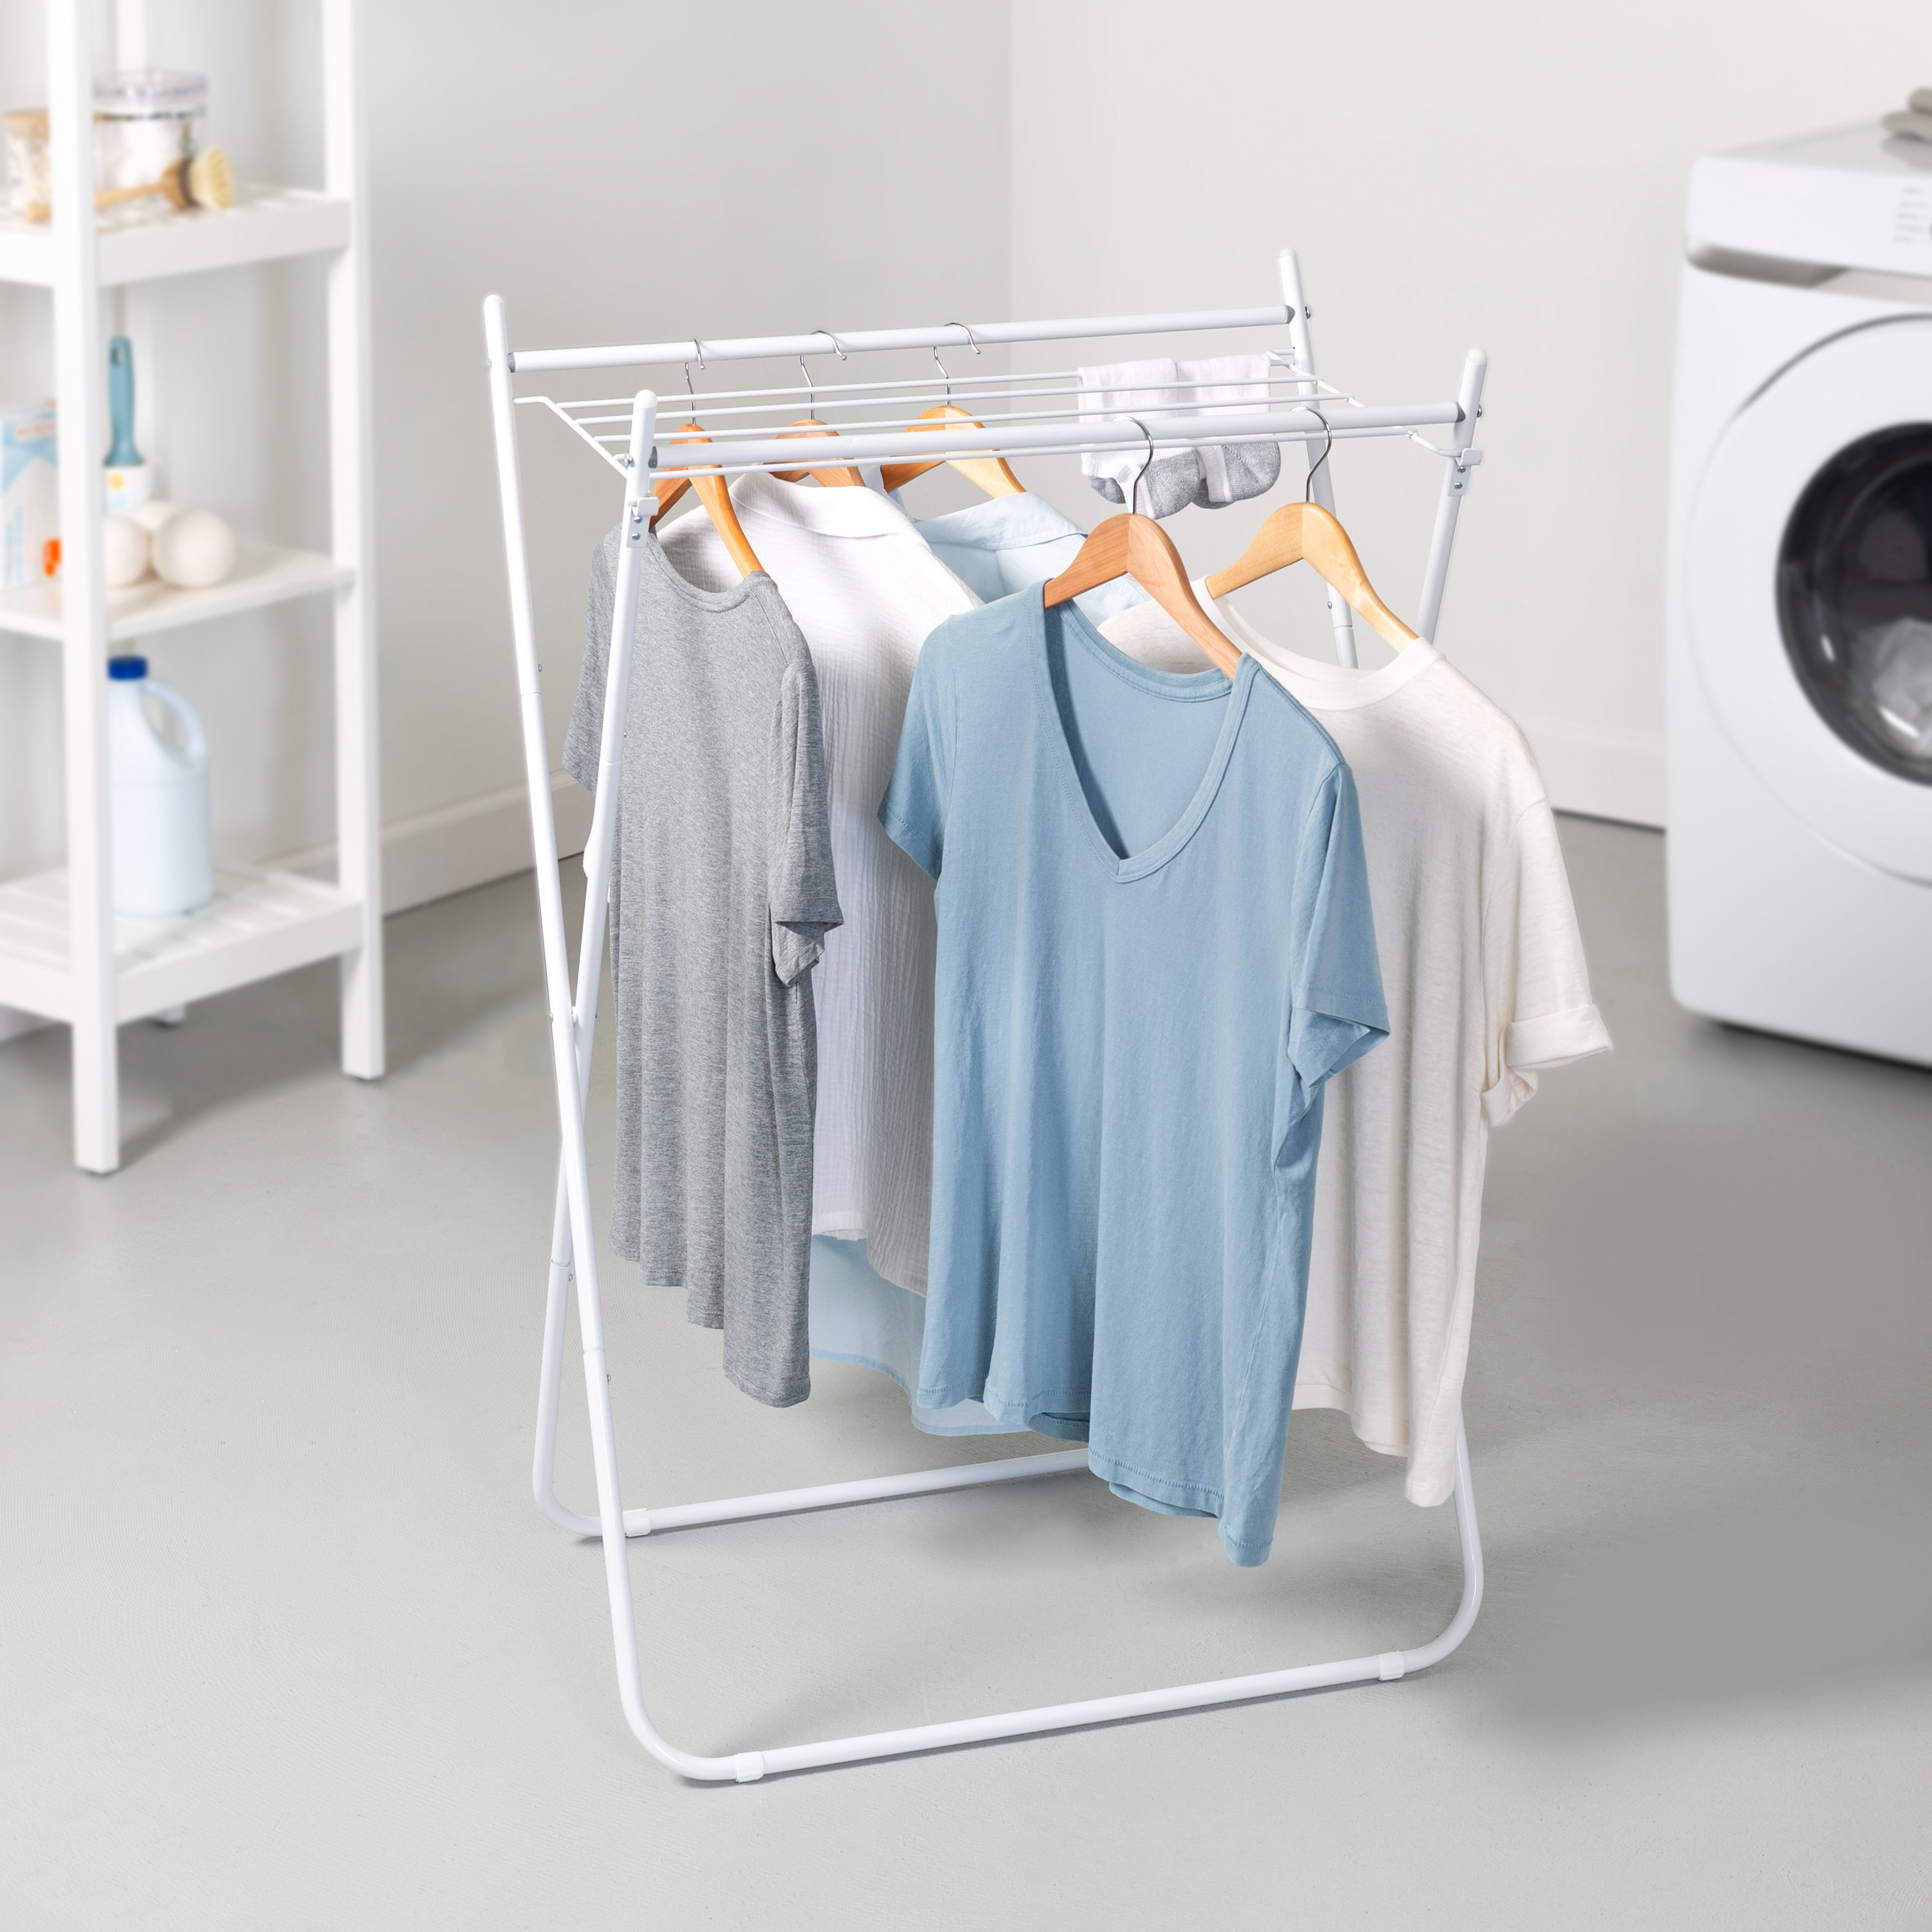 Honey-Can-Do White Metal Folding Clothes Drying Rack